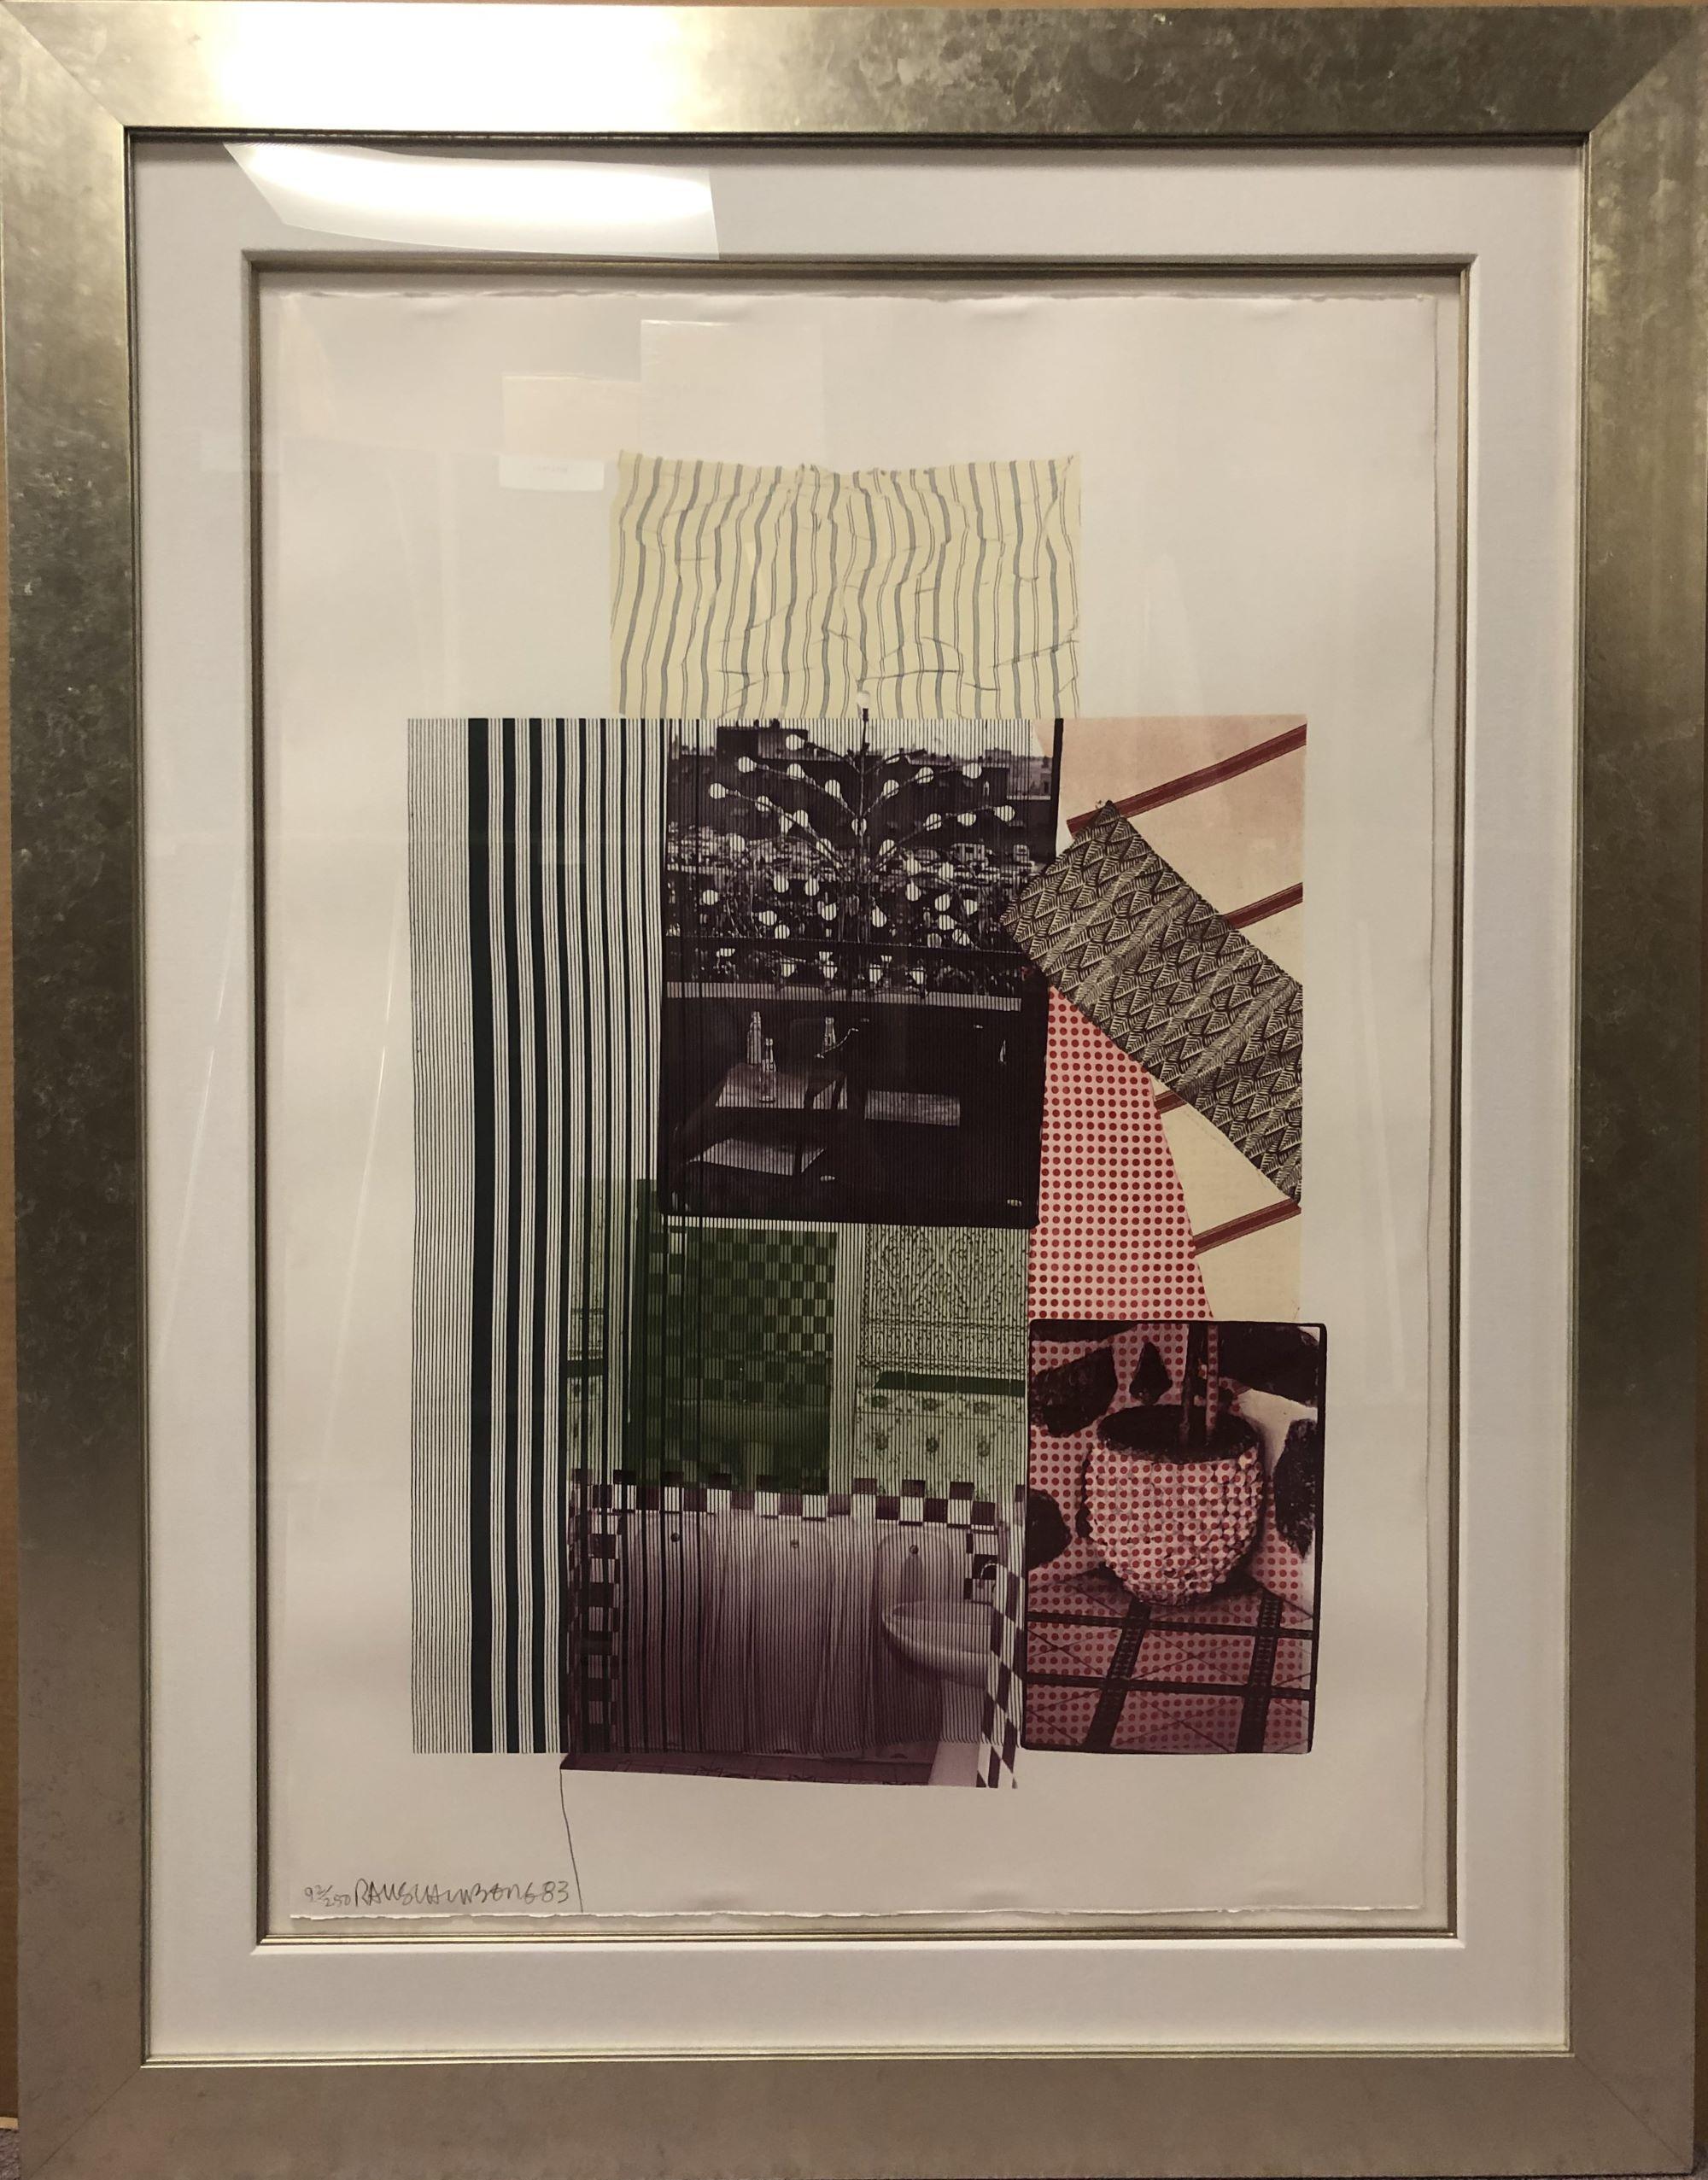 Pre-Morocco, 1983 (Eight by Eight) - Print by Robert Rauschenberg